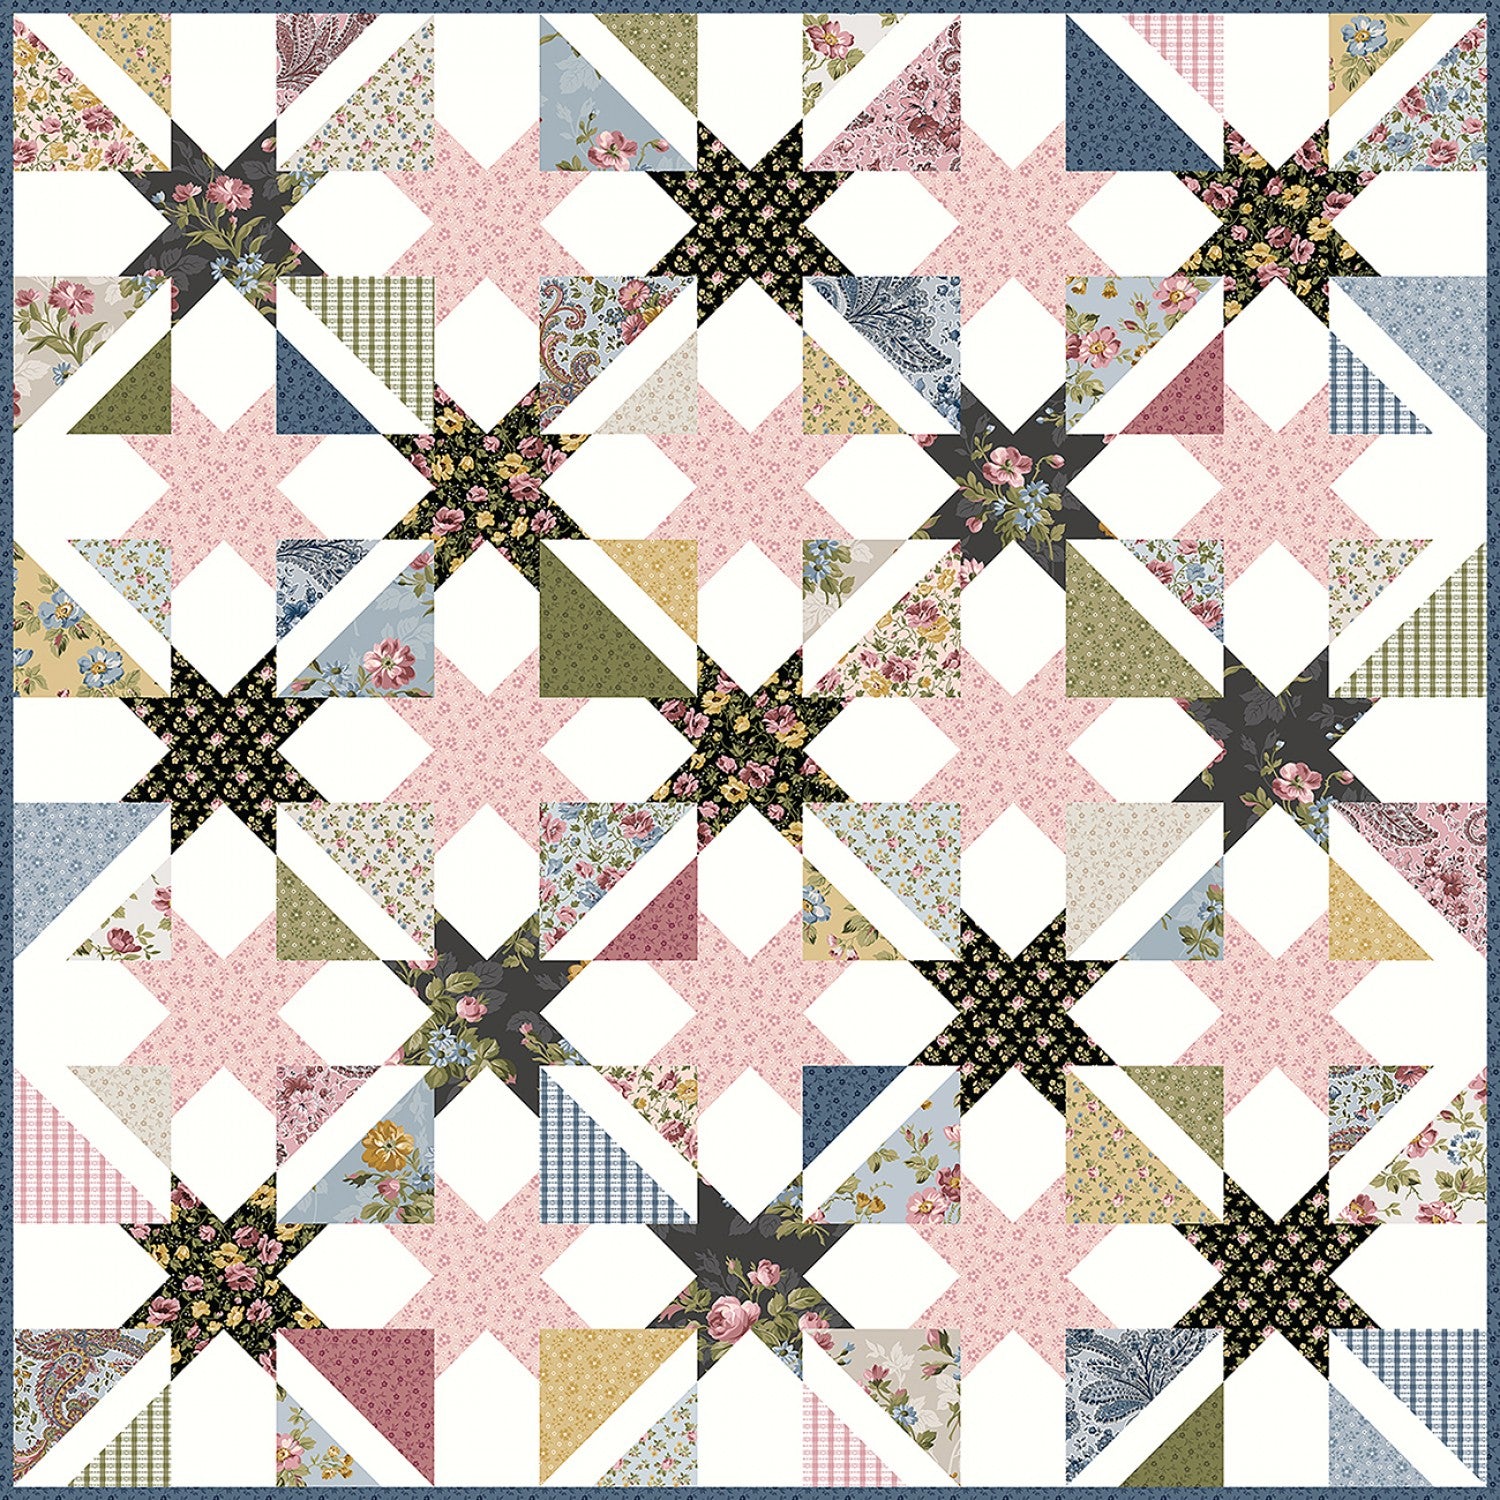 The Midnight Garden Quilt by Gerri Robinson of Planted Seed Designs is fat quarter friendly and features a pieced block with two different post and sashing variations. Finished size is 56" x 56".